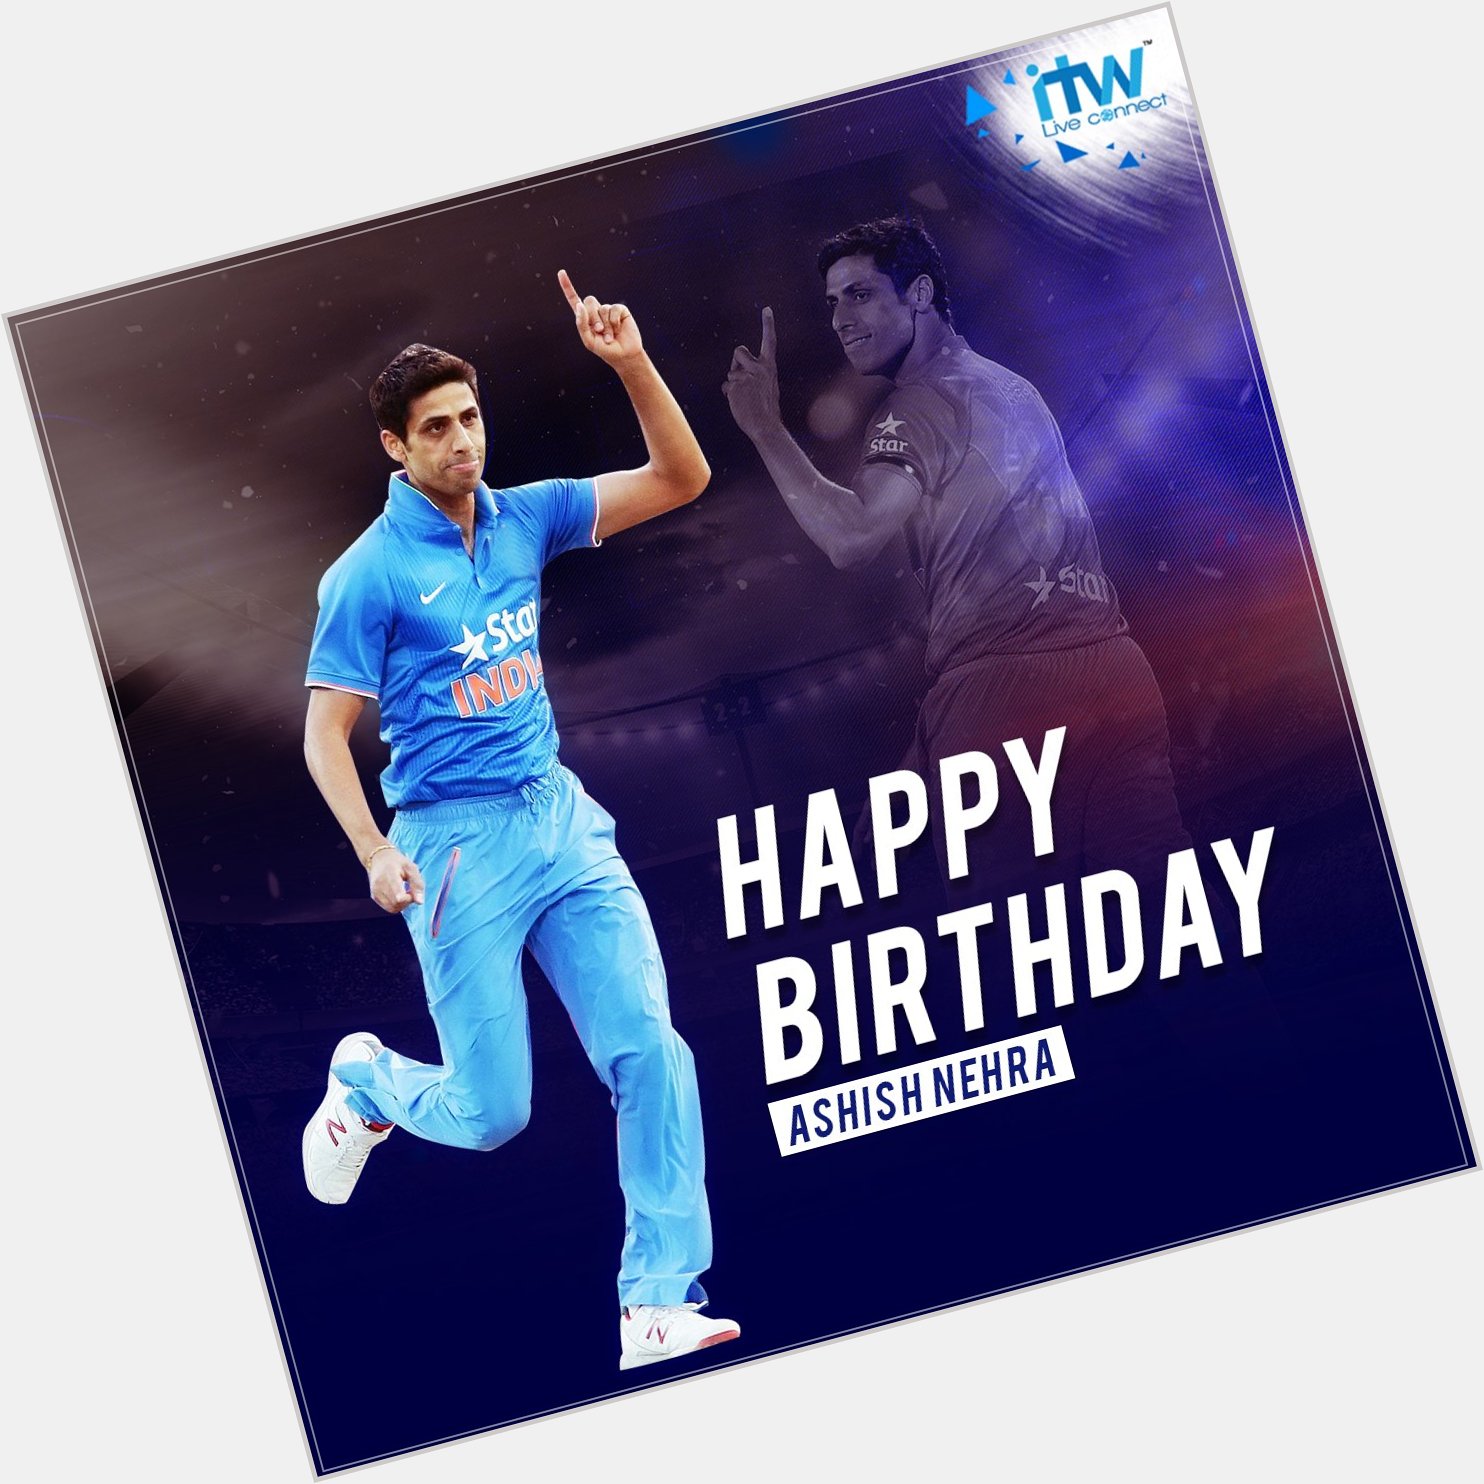 Happy Birthday to one of the best bowlers India has produced and two time winner, Ashish Nehra! 